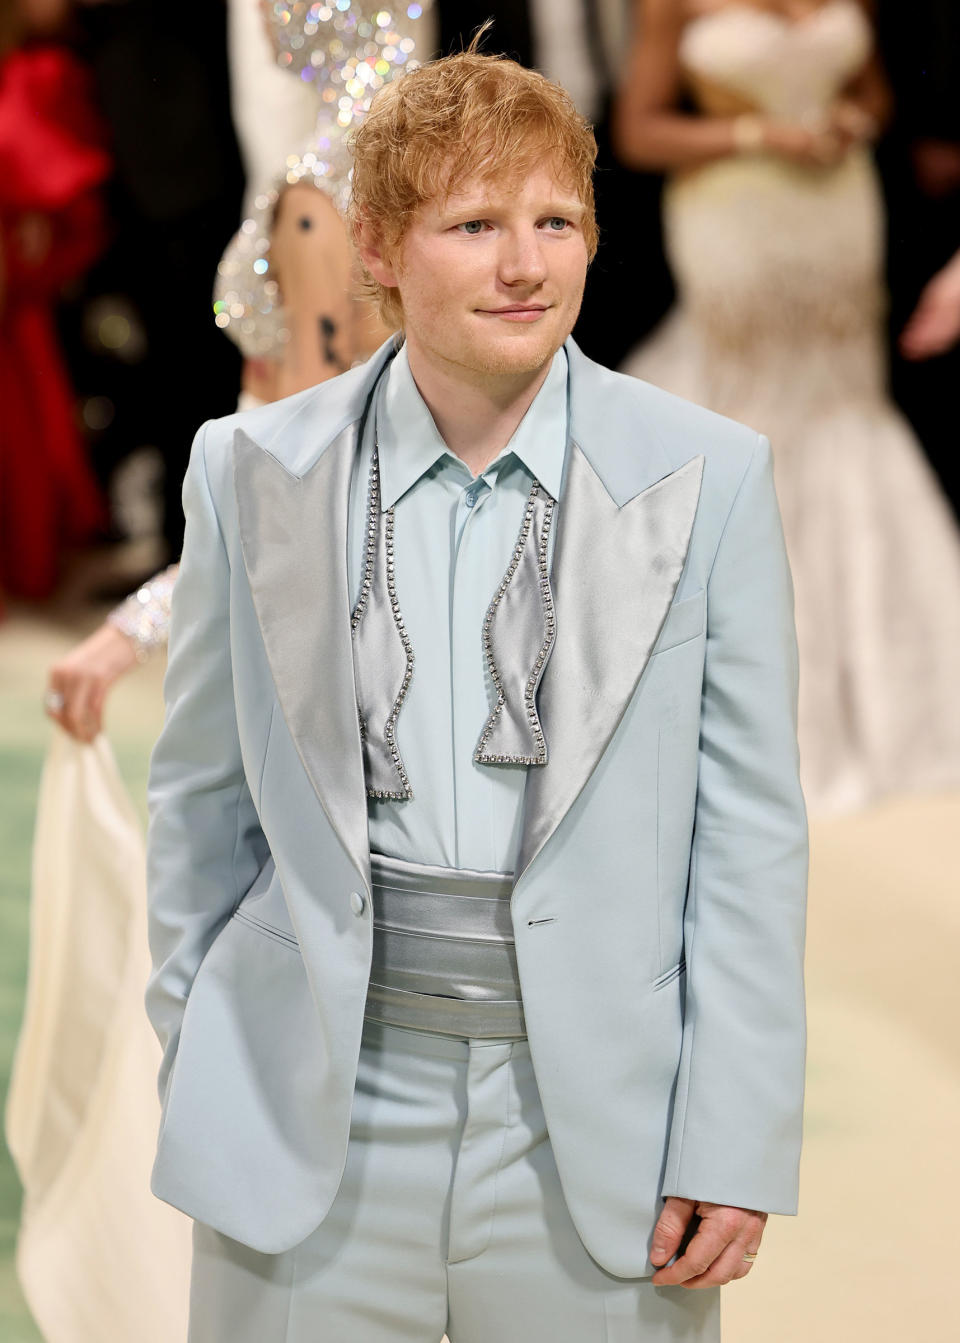 Ed Sheeran<span class="copyright">Theo Wargo±GA/The Hollywood Reporter/Getty Images</span>